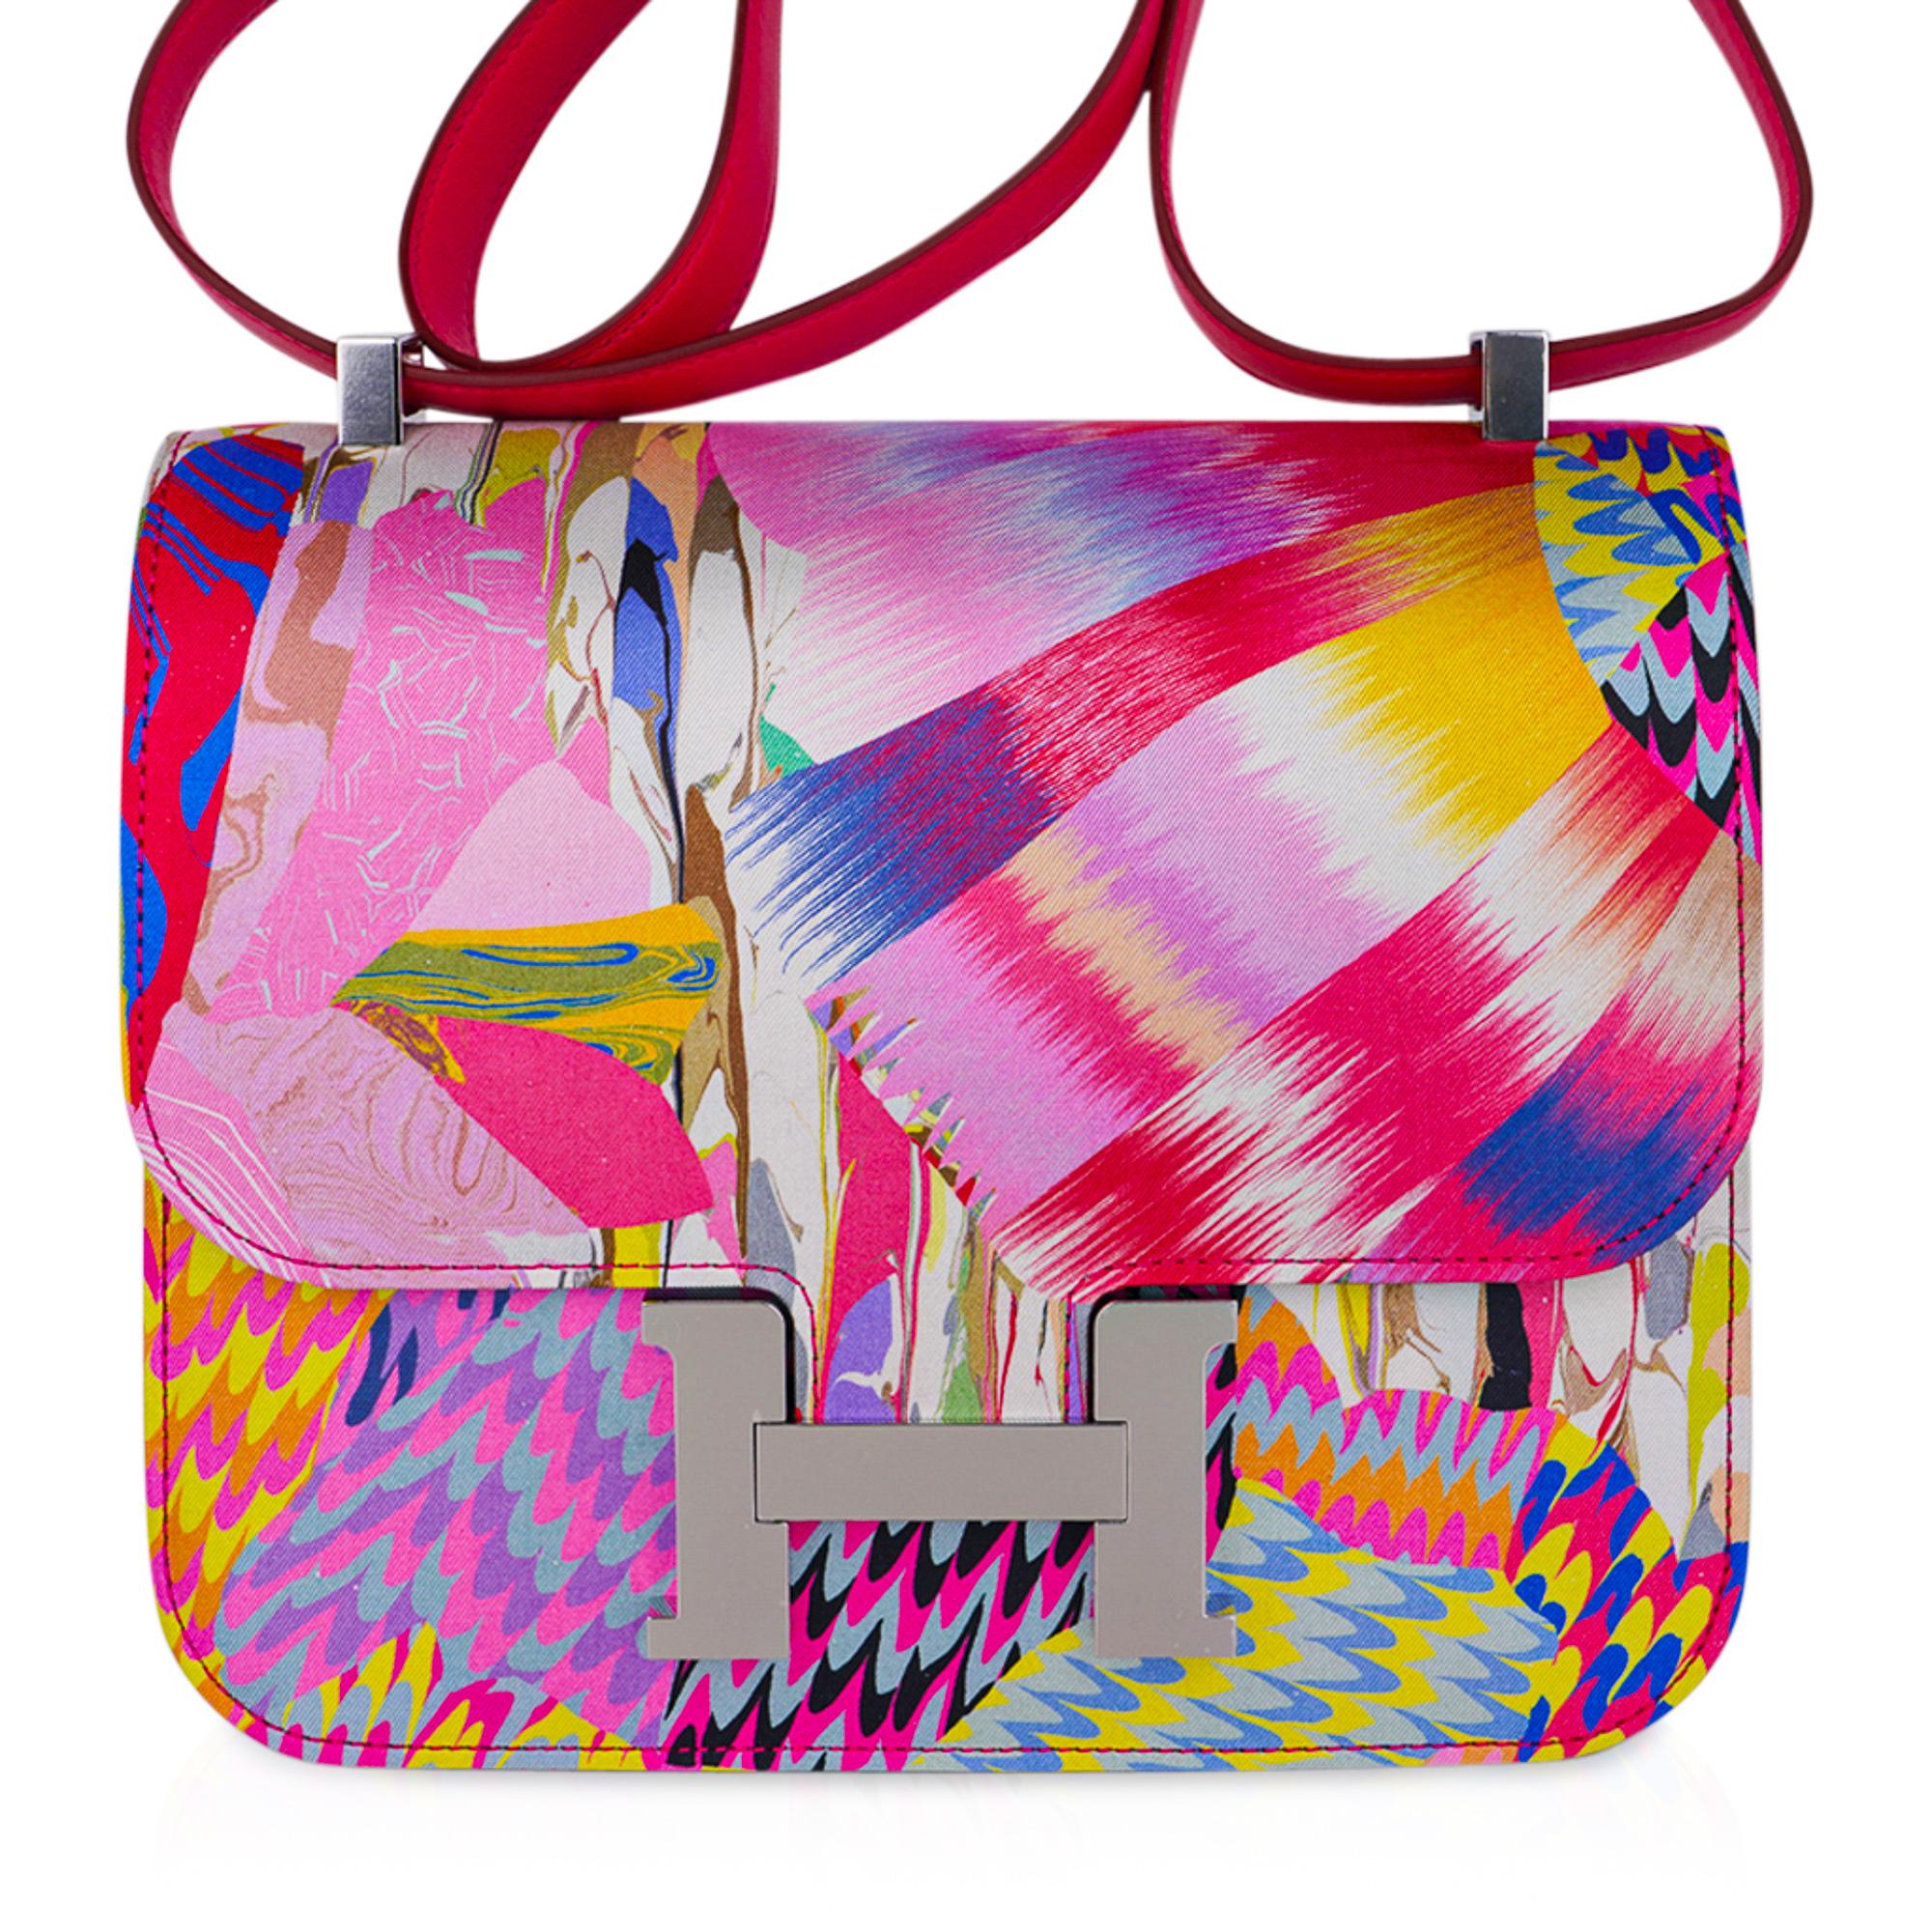 Mightychic offers a guaranteed authentic limited edition Hermes Constance 24 spectacular Marble Silk bag.
Accentuated with Rose Extreme Swift leather.
This rare technique creates exquisite colours in this intricate design.
A Japanese silk marbling